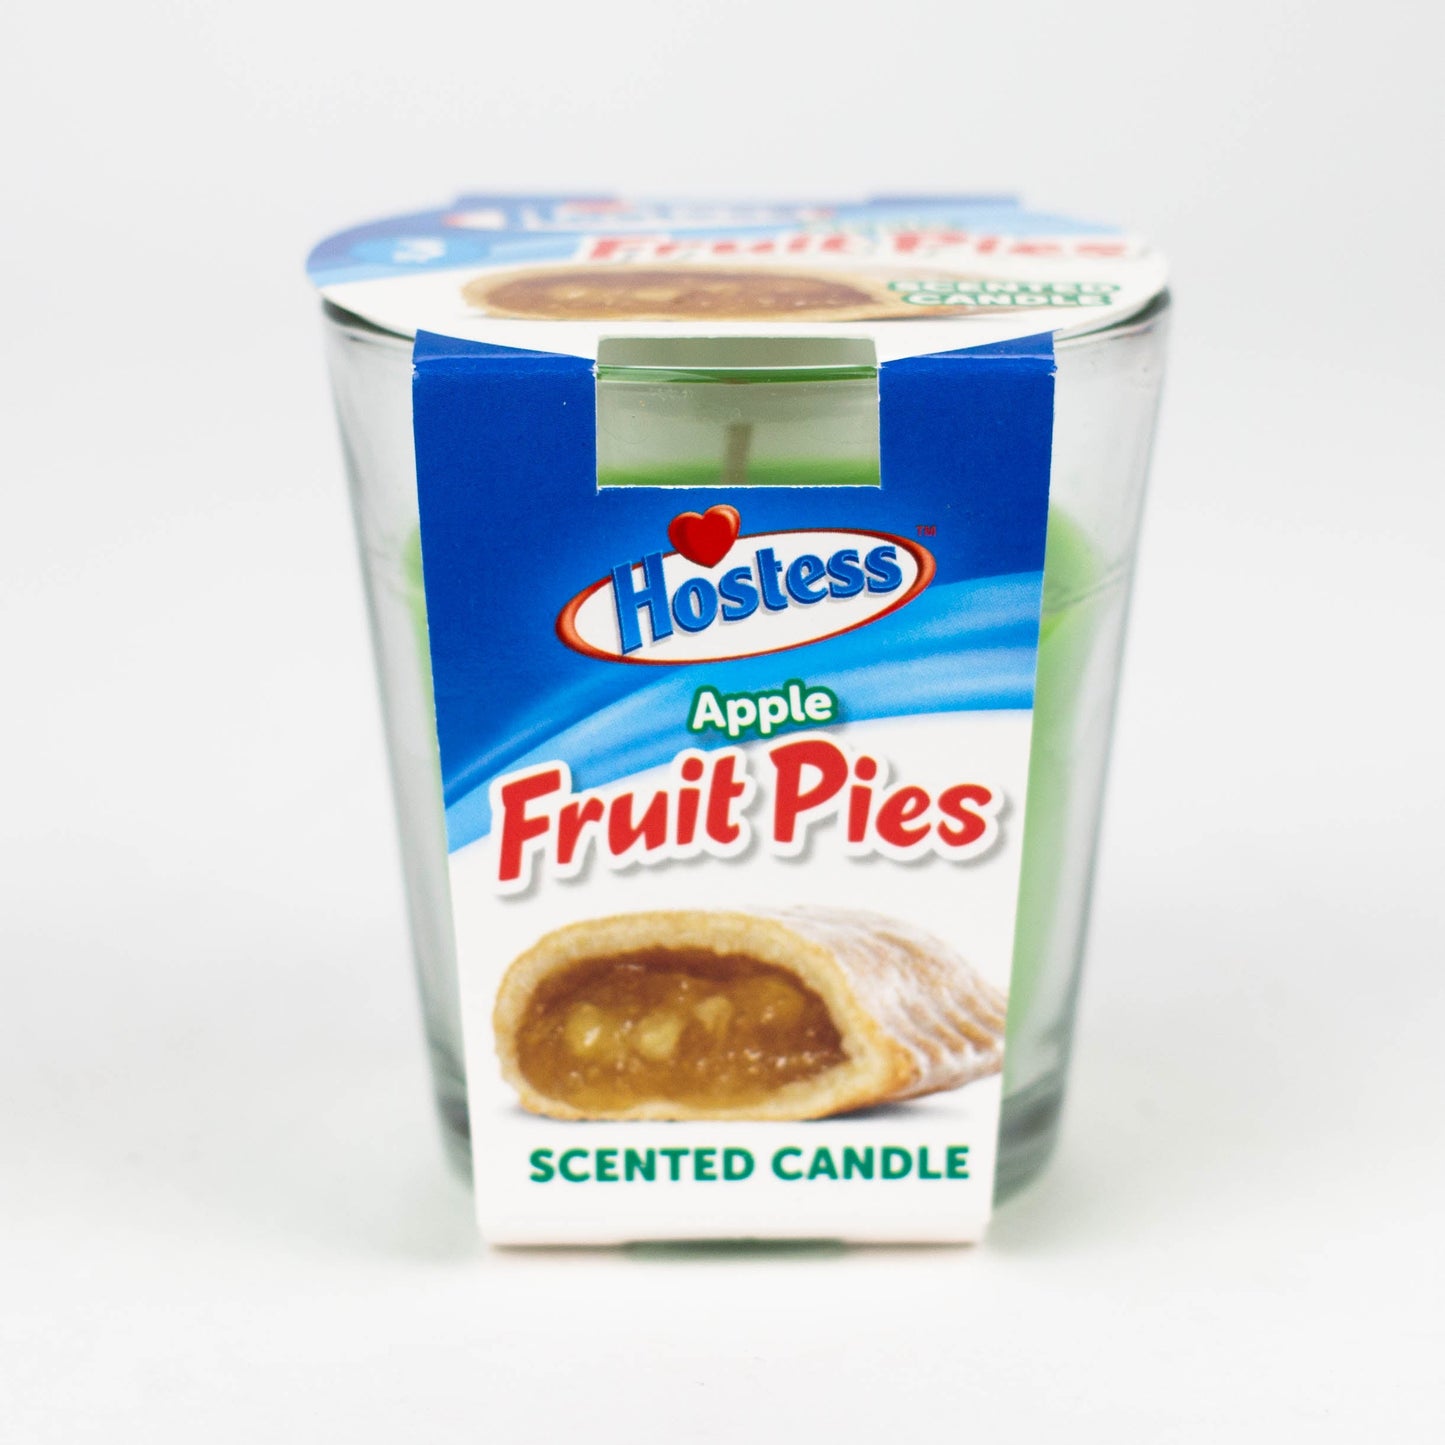 Hostess Scented Candle_7